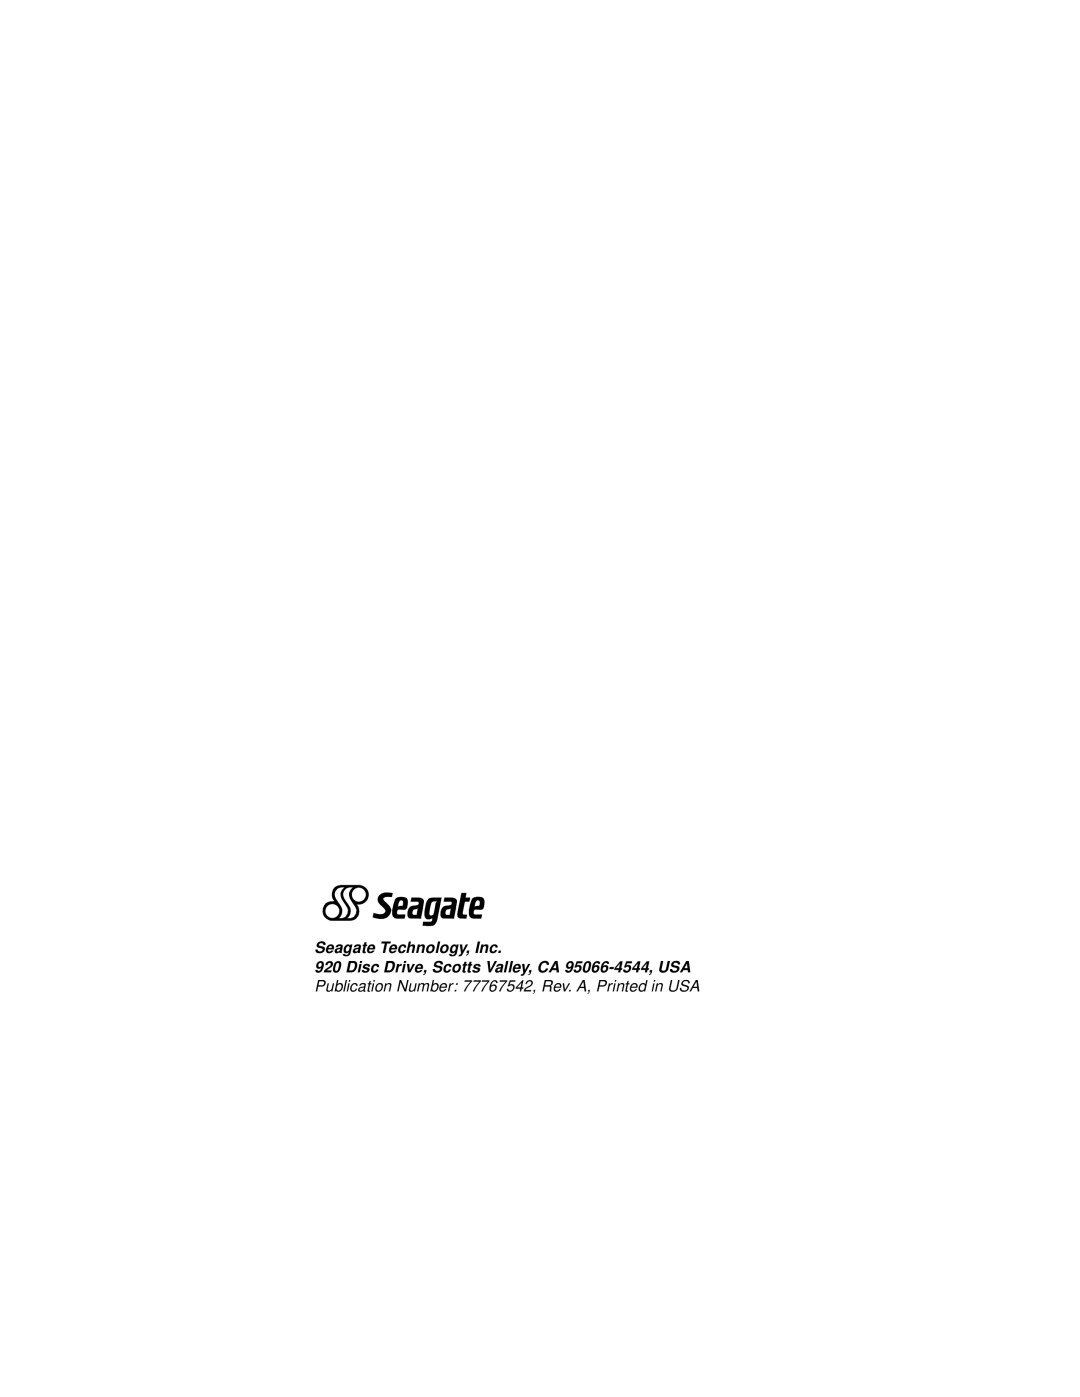 Seagate ST318275FC, ST39175FC manual Publication Number 77767542, Rev. A, Printed in USA, Seagate Technology, Inc 